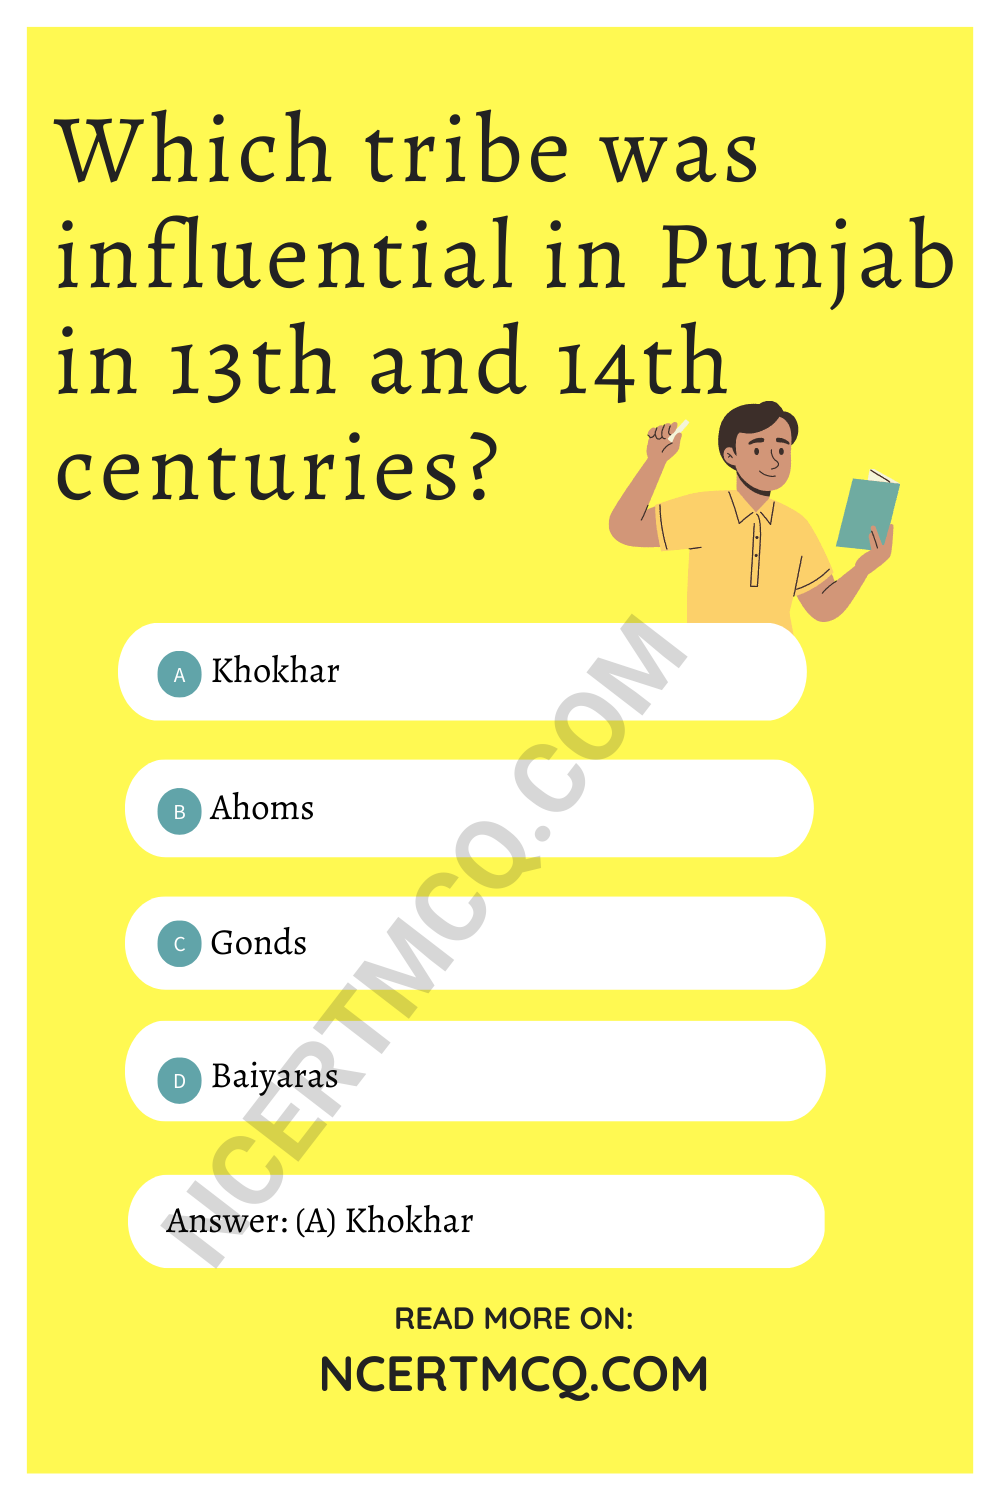 Which tribe was influential in Punjab in 13th and 14th centuries?